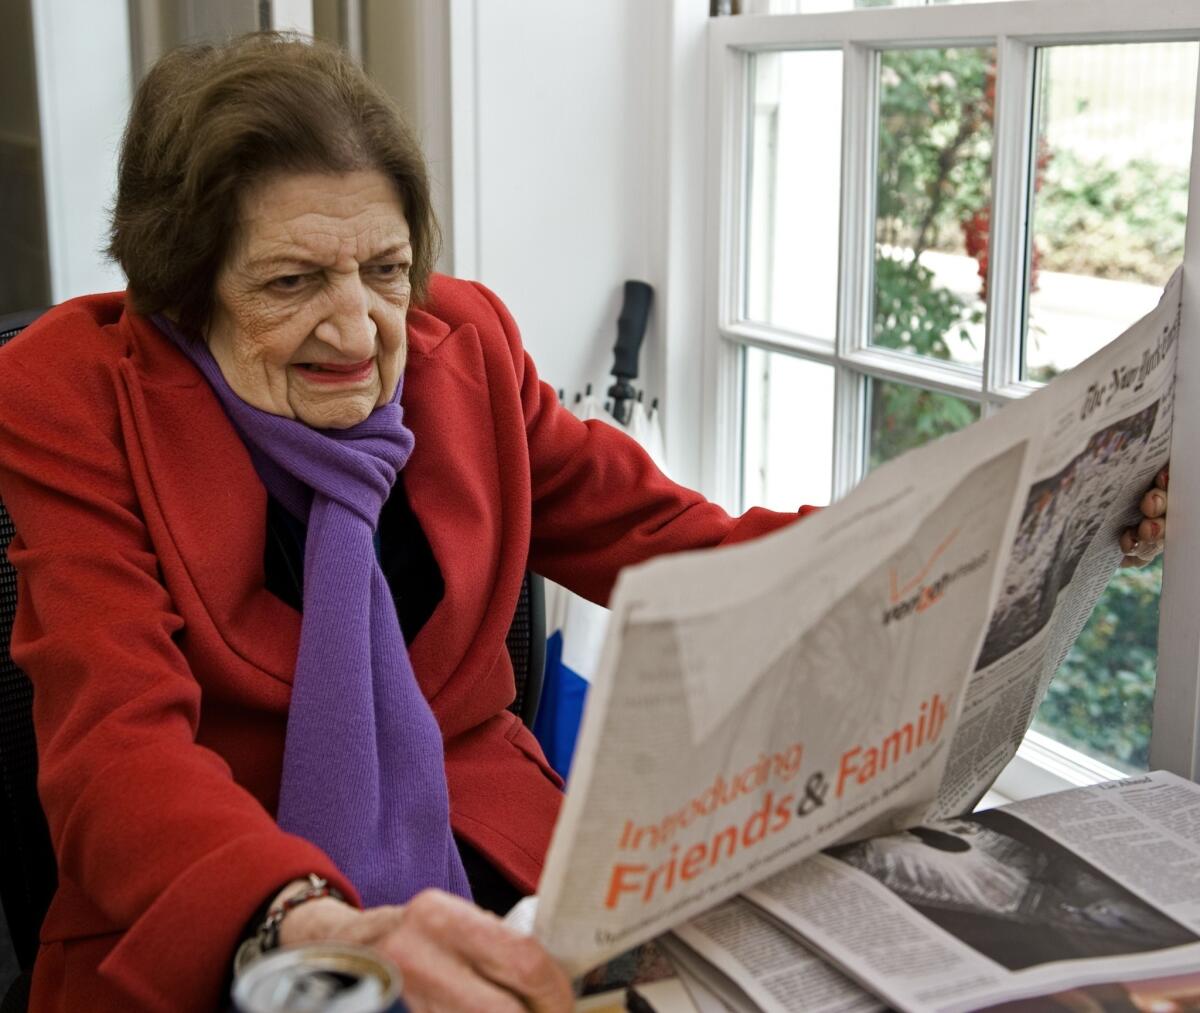 Correspondent Helen Thomas reads a newspaper inside the White House briefing room. Thomas, who was the first woman to join the White House Correspondents' Association, died July 20. She was 92.